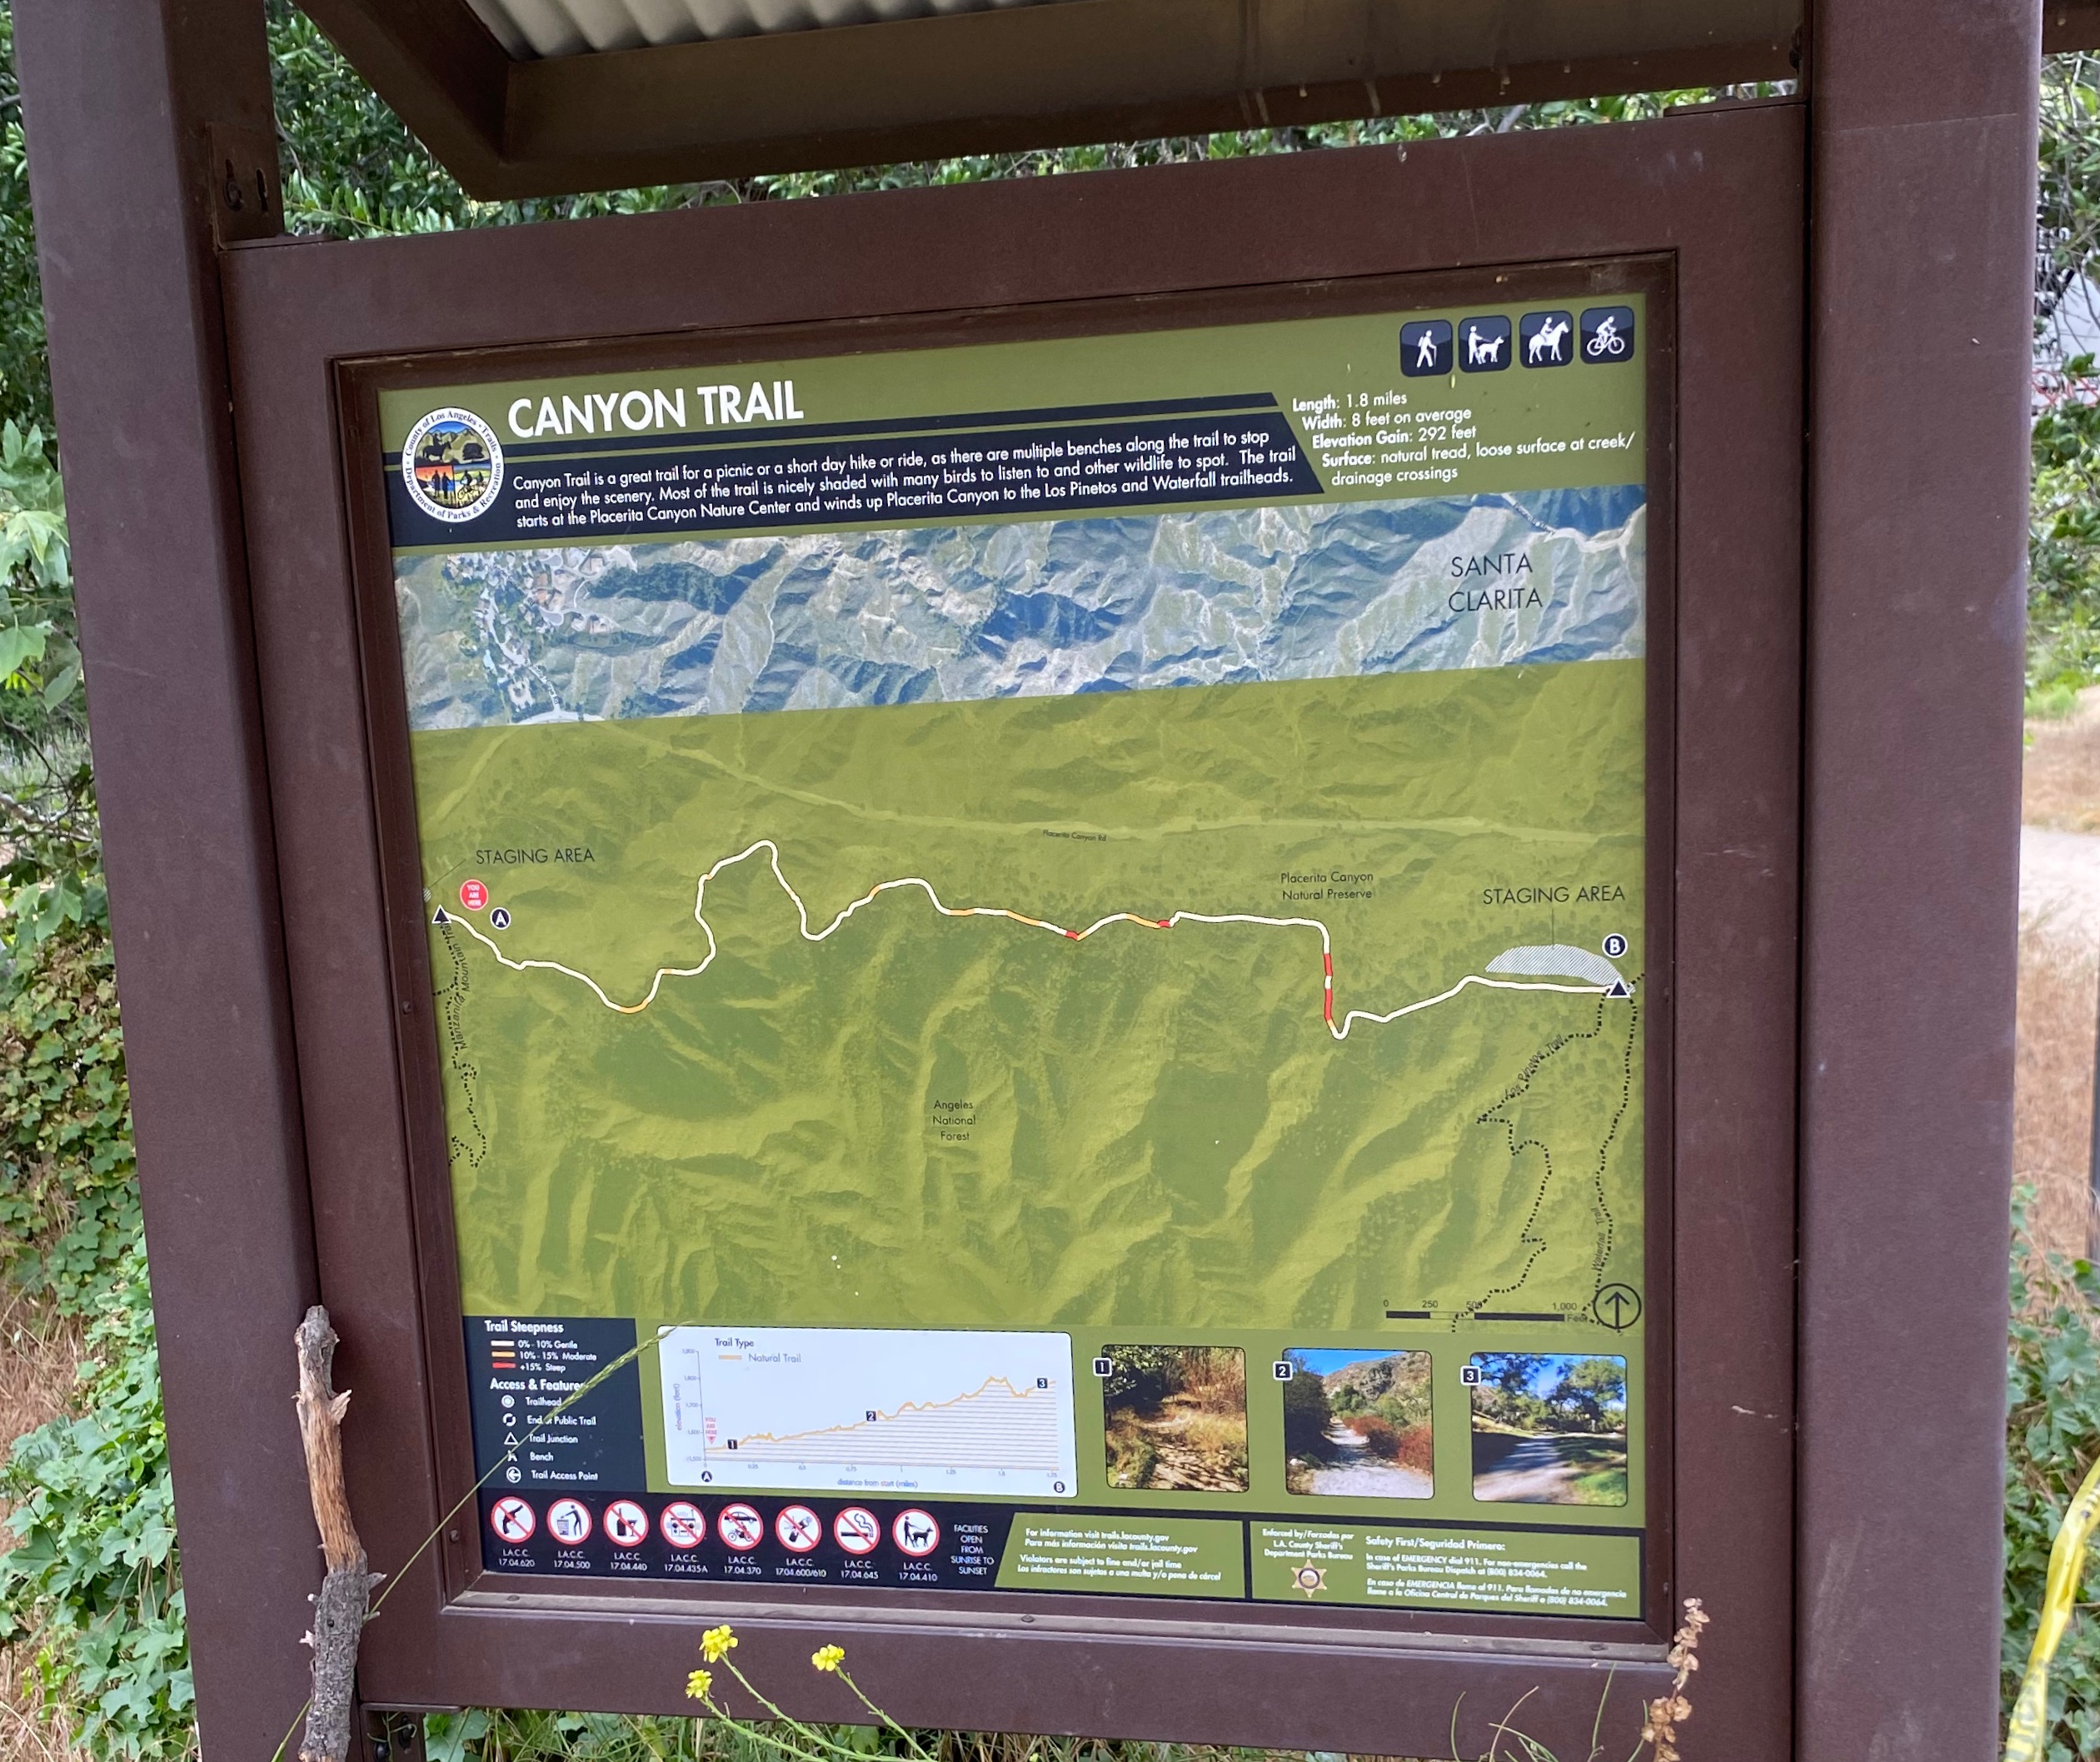 A large trail sign at the beginning of the Canyon Trail in Placerita Canyon in Newhall, CA.